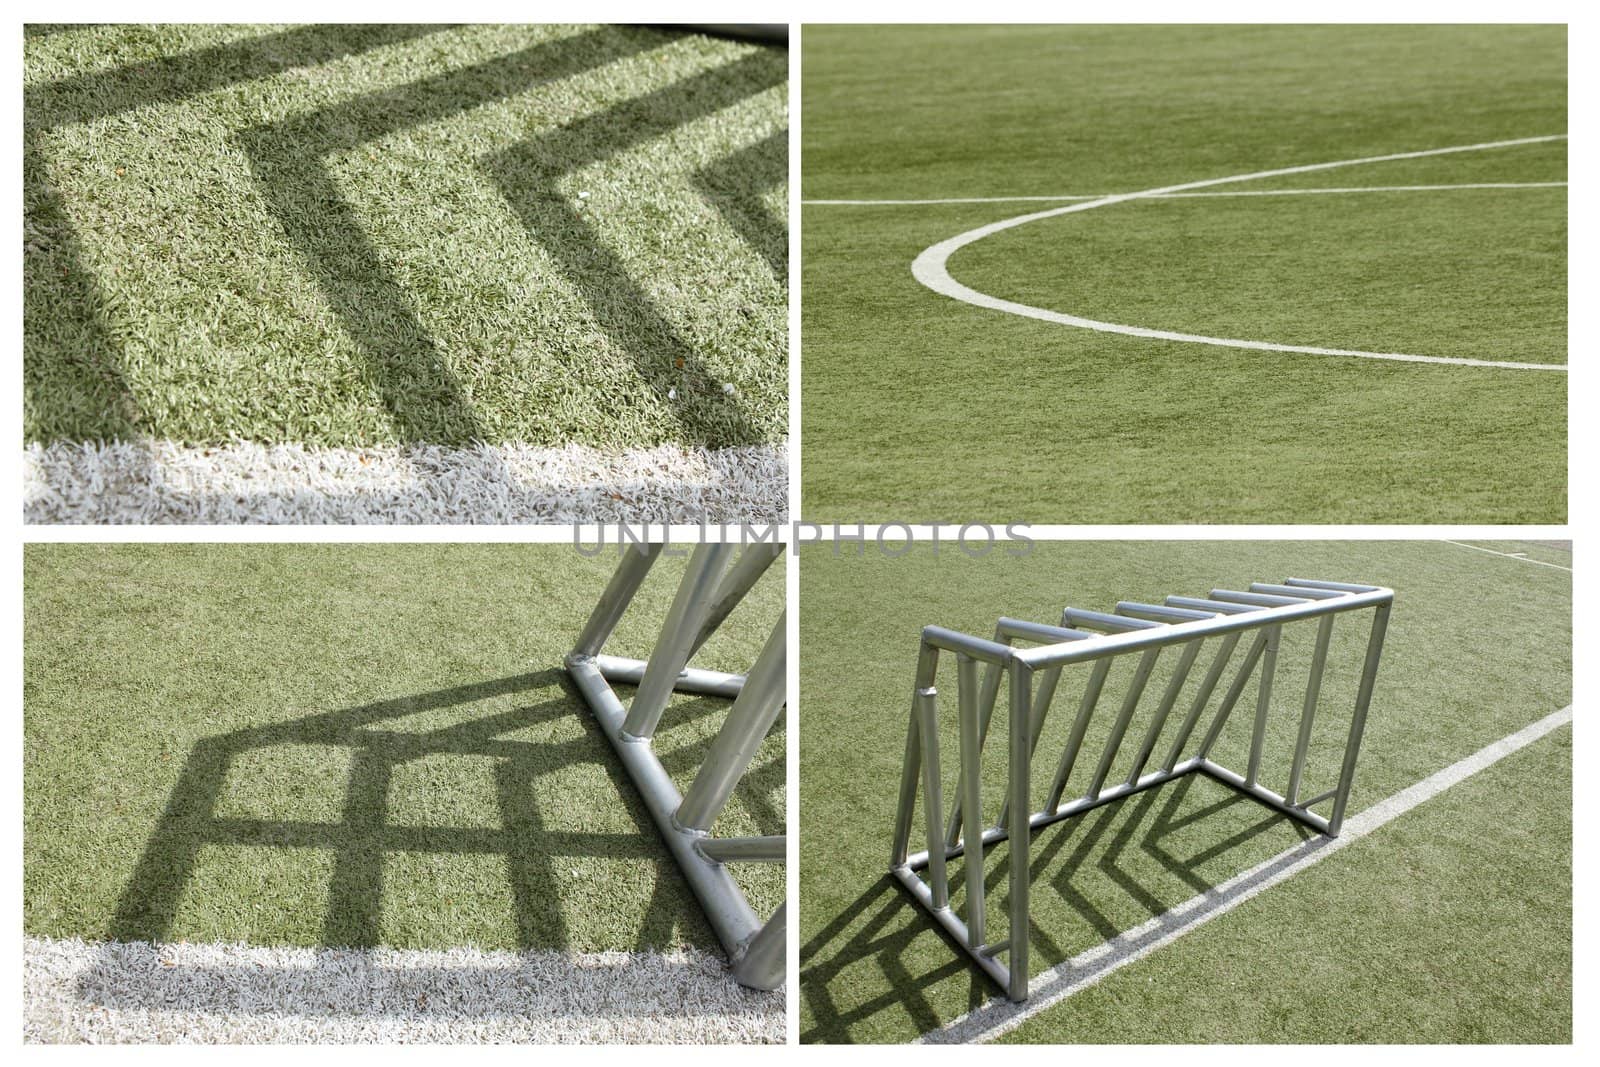 football goal collage